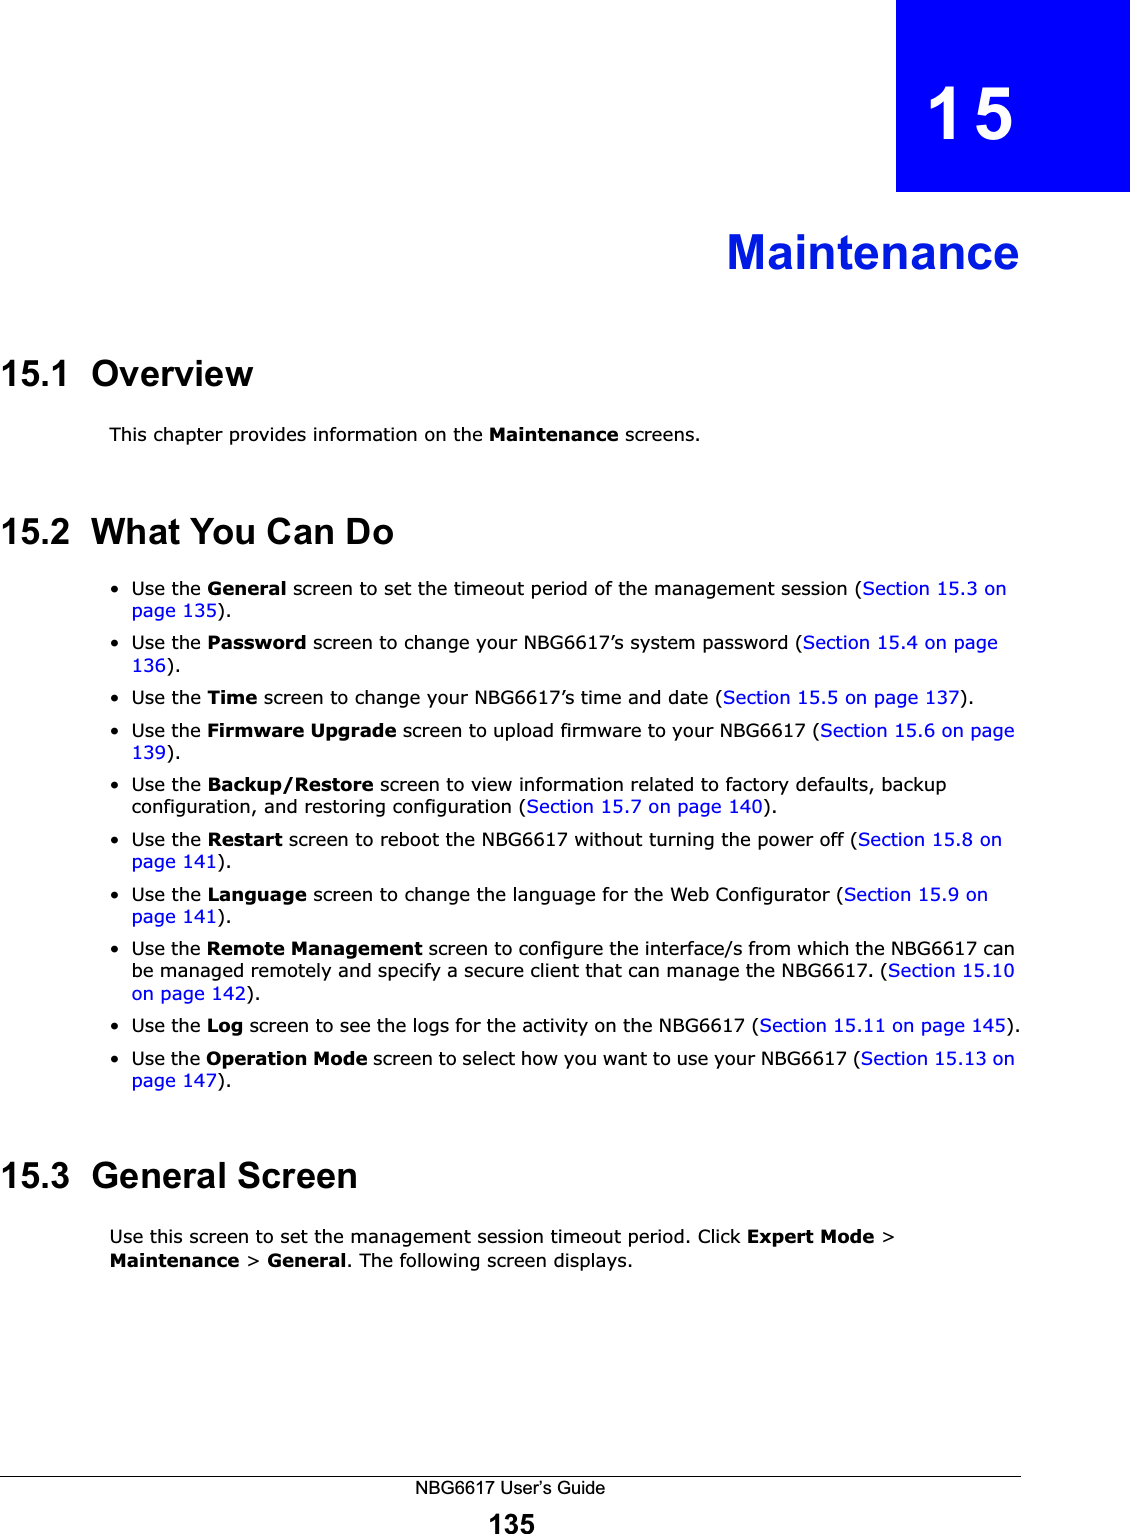 NBG6617 User’s Guide135CHAPTER   15Maintenance15.1  OverviewThis chapter provides information on the Maintenance screens. 15.2  What You Can Do•Use the General screen to set the timeout period of the management session (Section 15.3 on page 135). •Use the Password screen to change your NBG6617’s system password (Section 15.4 on page 136).•Use the Time screen to change your NBG6617’s time and date (Section 15.5 on page 137).•Use the Firmware Upgrade screen to upload firmware to your NBG6617 (Section 15.6 on page 139).•Use the Backup/Restore screen to view information related to factory defaults, backup configuration, and restoring configuration (Section 15.7 on page 140).•Use the Restart screen to reboot the NBG6617 without turning the power off (Section 15.8 on page 141).•Use the Language screen to change the language for the Web Configurator (Section 15.9 on page 141).•Use the Remote Management screen to configure the interface/s from which the NBG6617 can be managed remotely and specify a secure client that can manage the NBG6617. (Section 15.10 on page 142).•Use the Log screen to see the logs for the activity on the NBG6617 (Section 15.11 on page 145).•Use the Operation Mode screen to select how you want to use your NBG6617 (Section 15.13 on page 147). 15.3  General Screen Use this screen to set the management session timeout period. Click Expert Mode &gt; Maintenance &gt; General. The following screen displays.